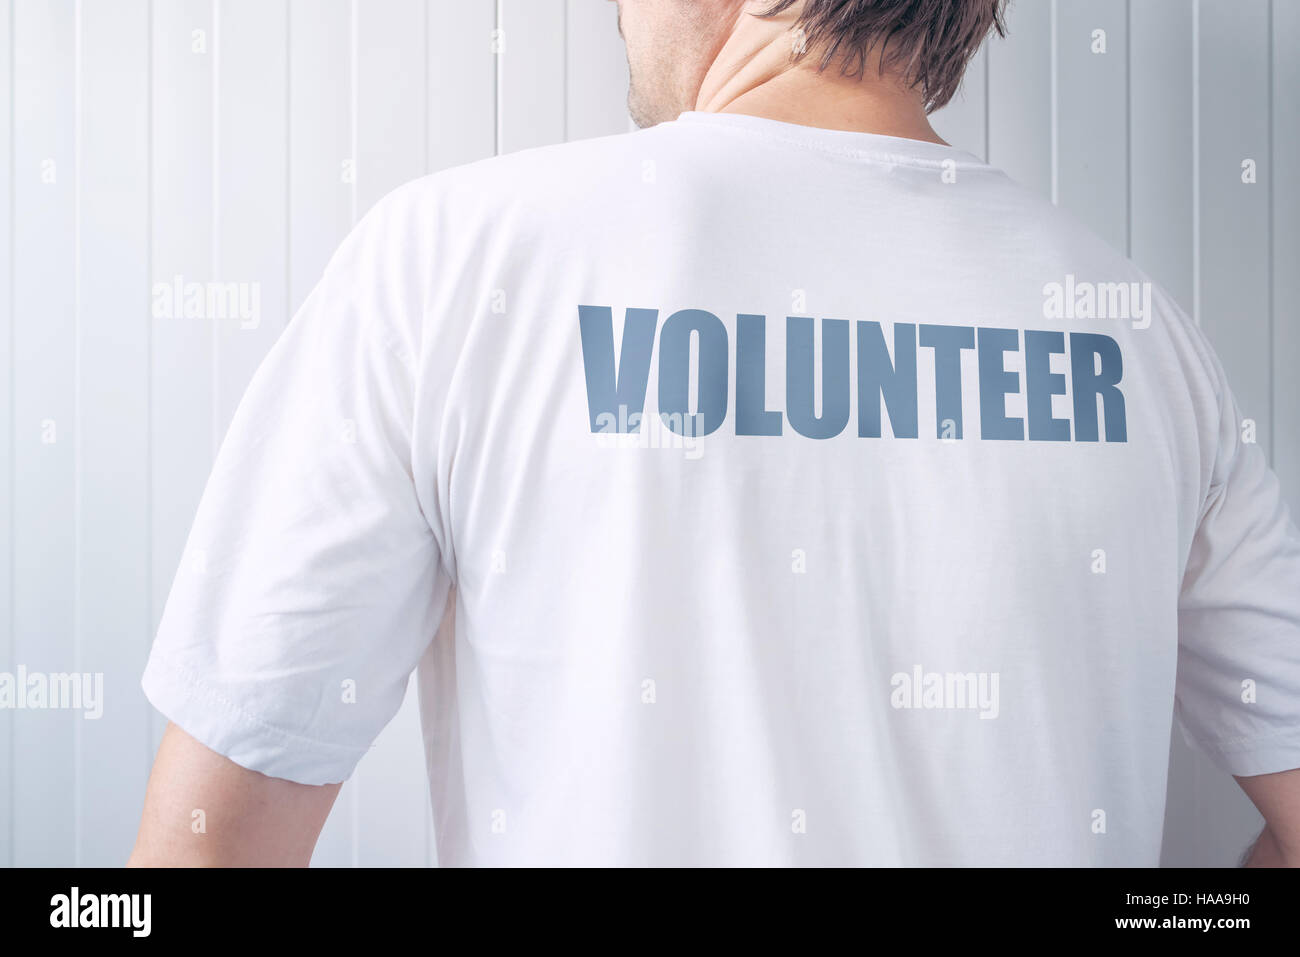 Guy wearing shirt with Volunteer label printed on back, confident friendly person offering help Stock Photo